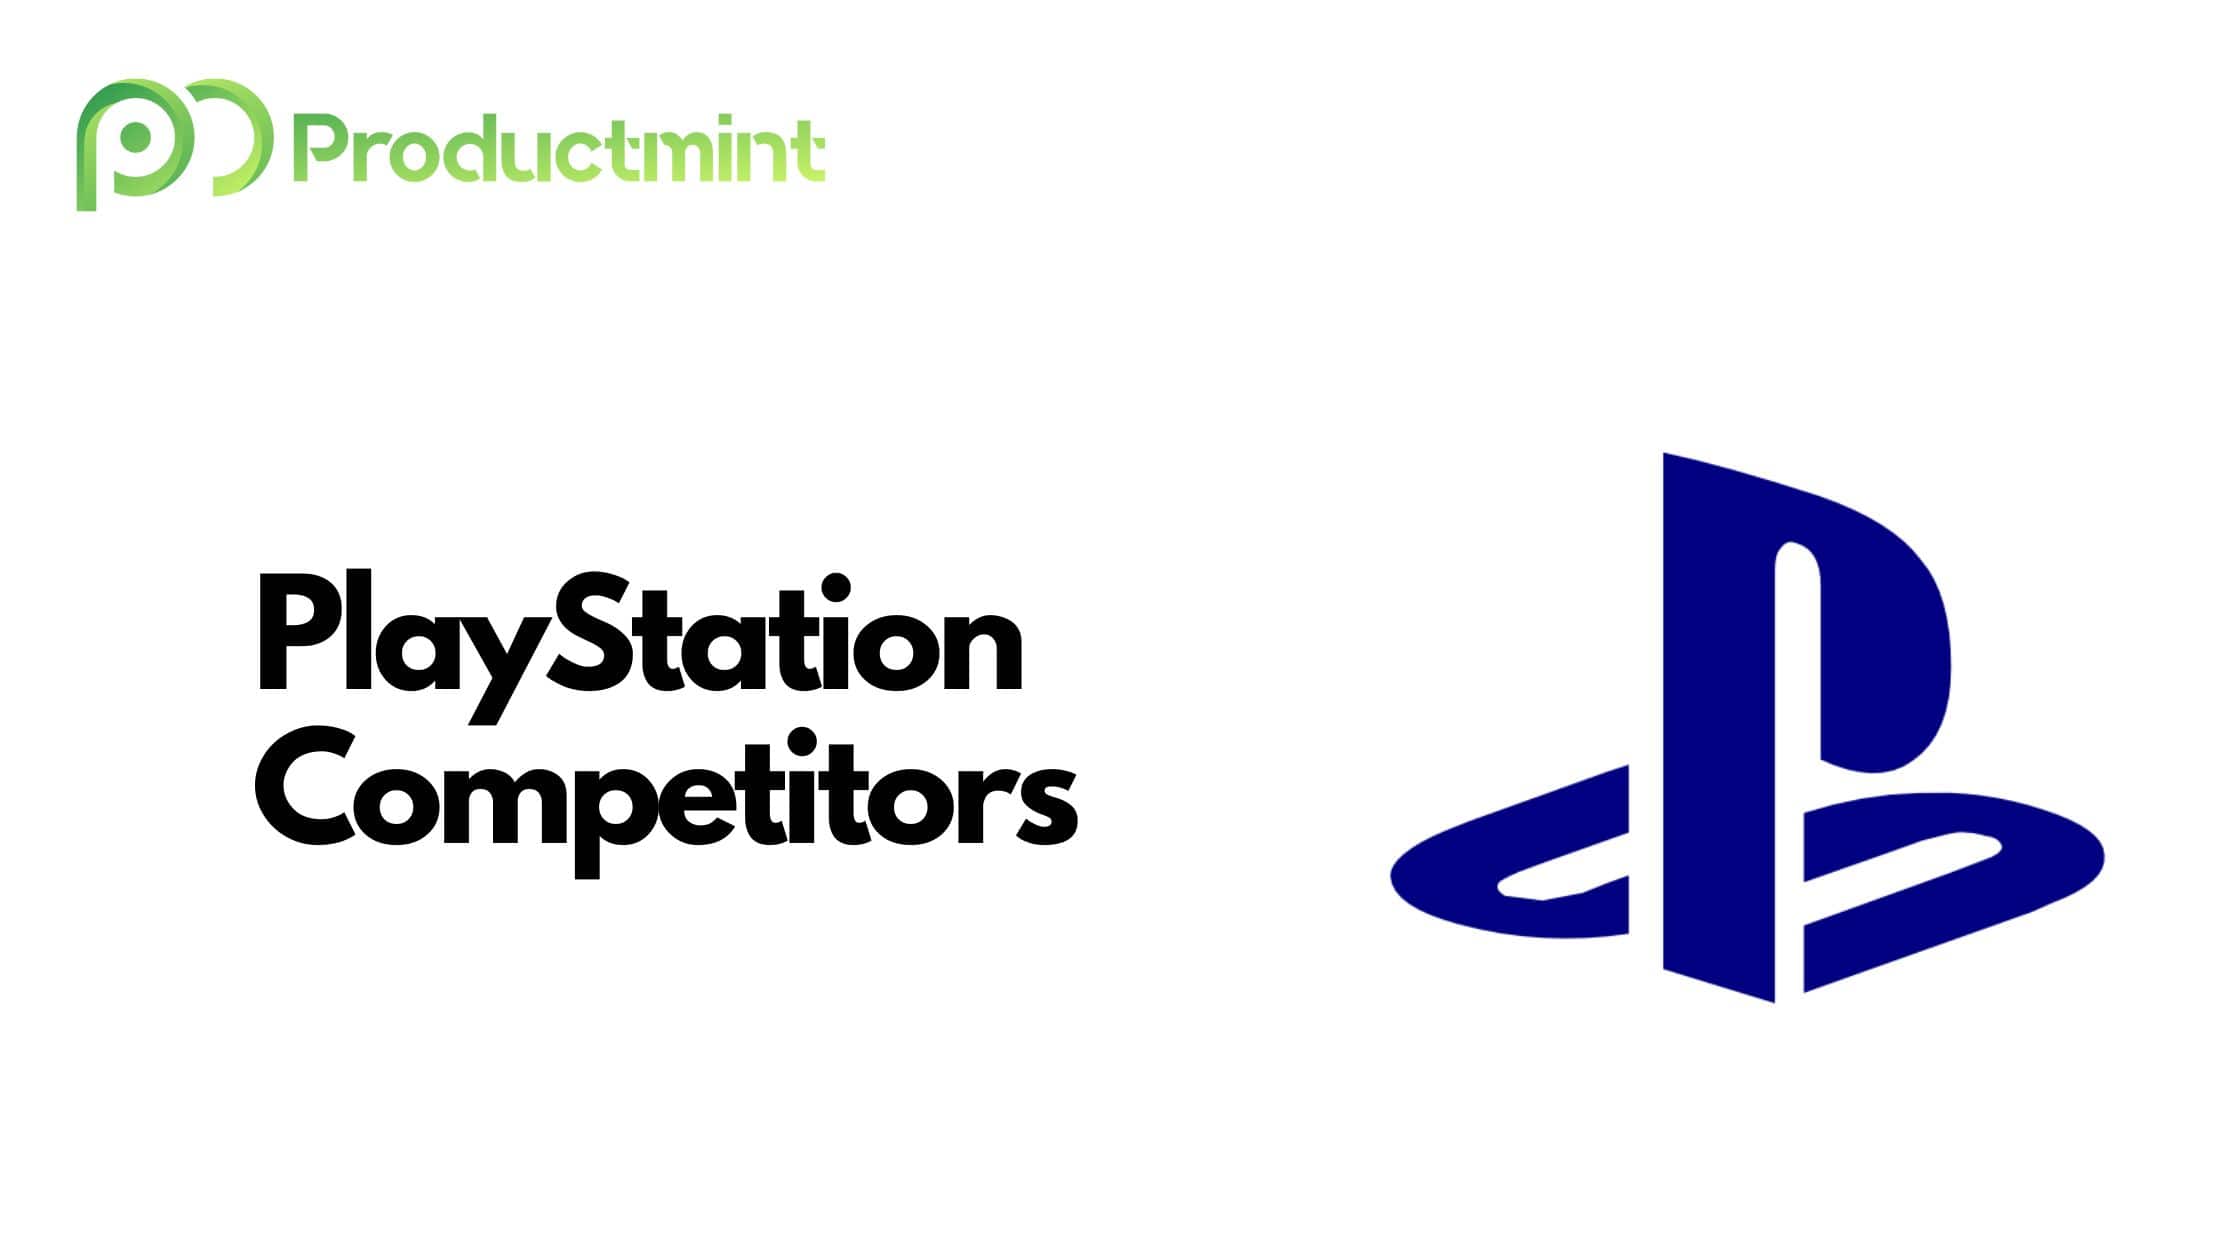 PlayStation Competitors